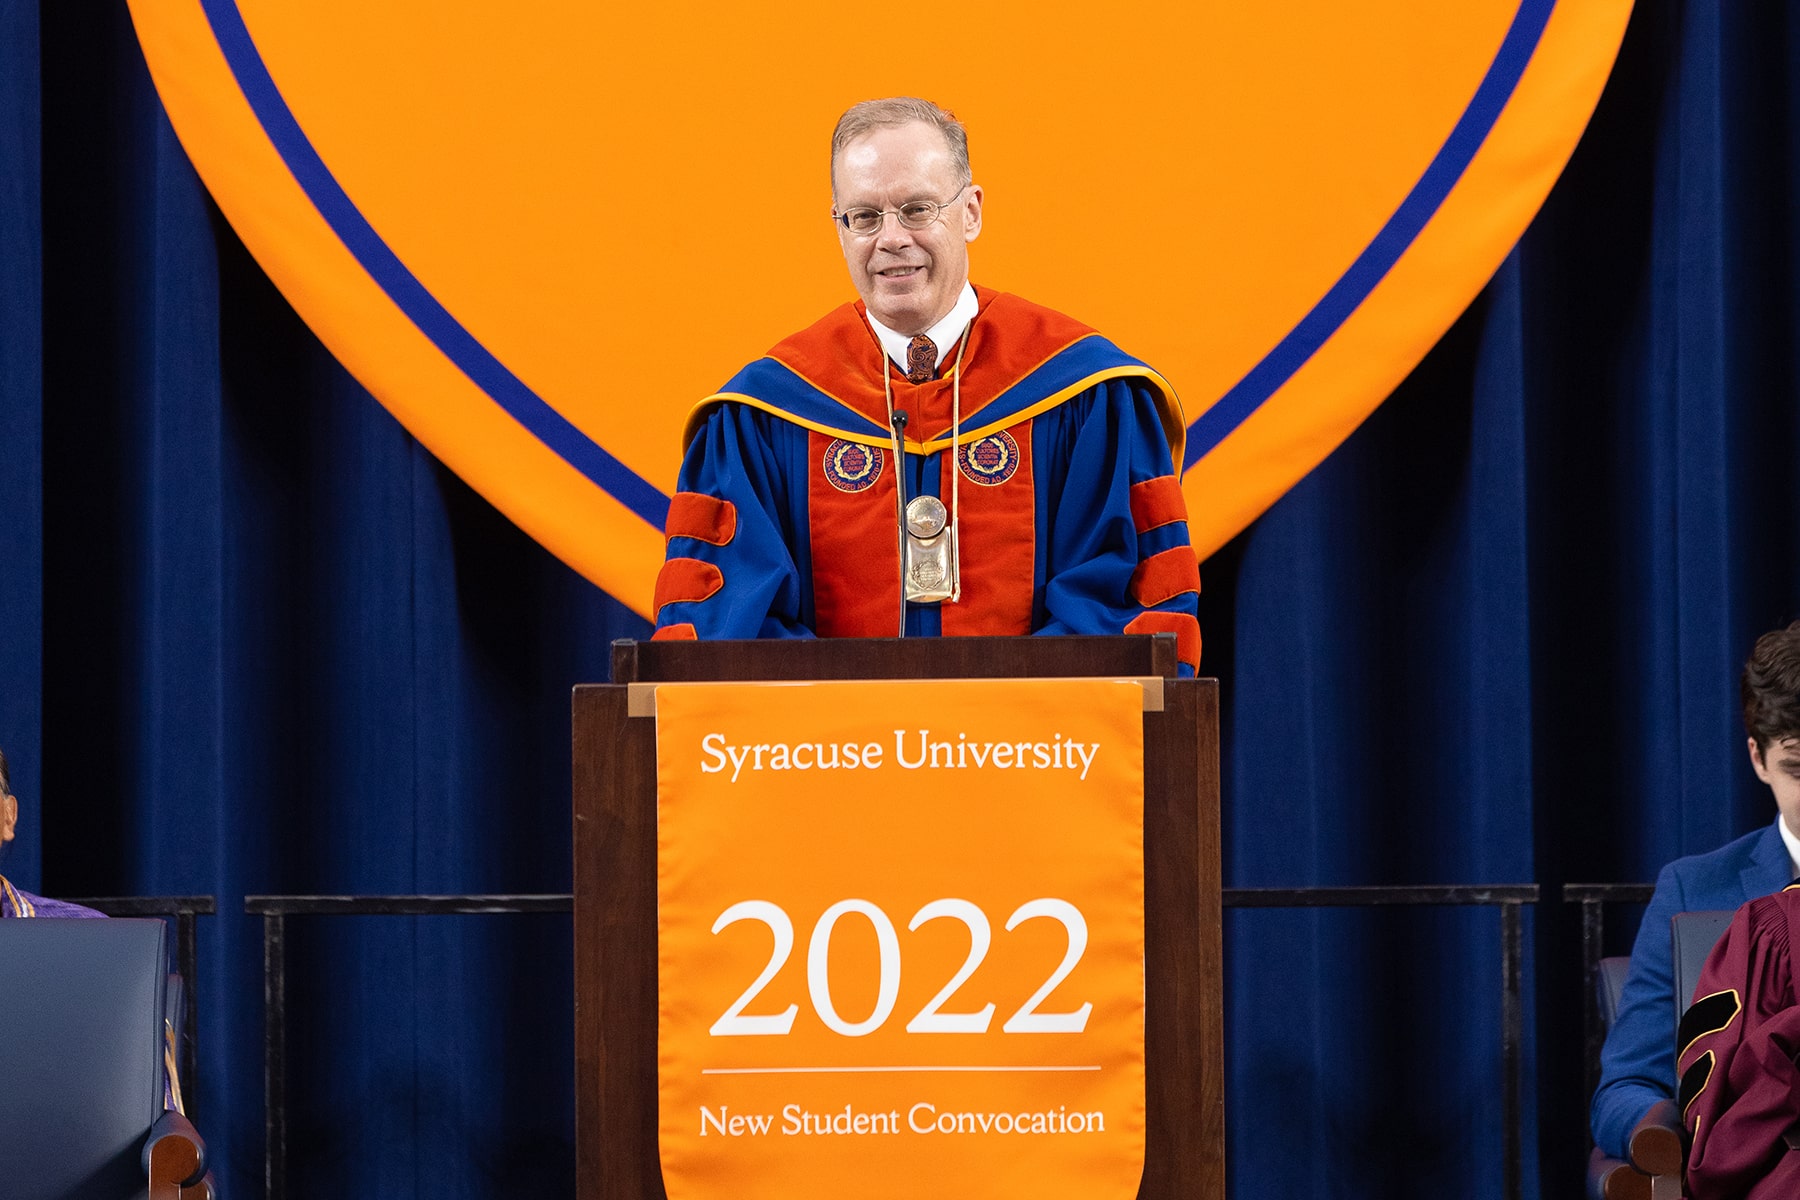 Chancellor Syverud, dressed in full regalia, speaks at the podium during 2022 New Student Convocation